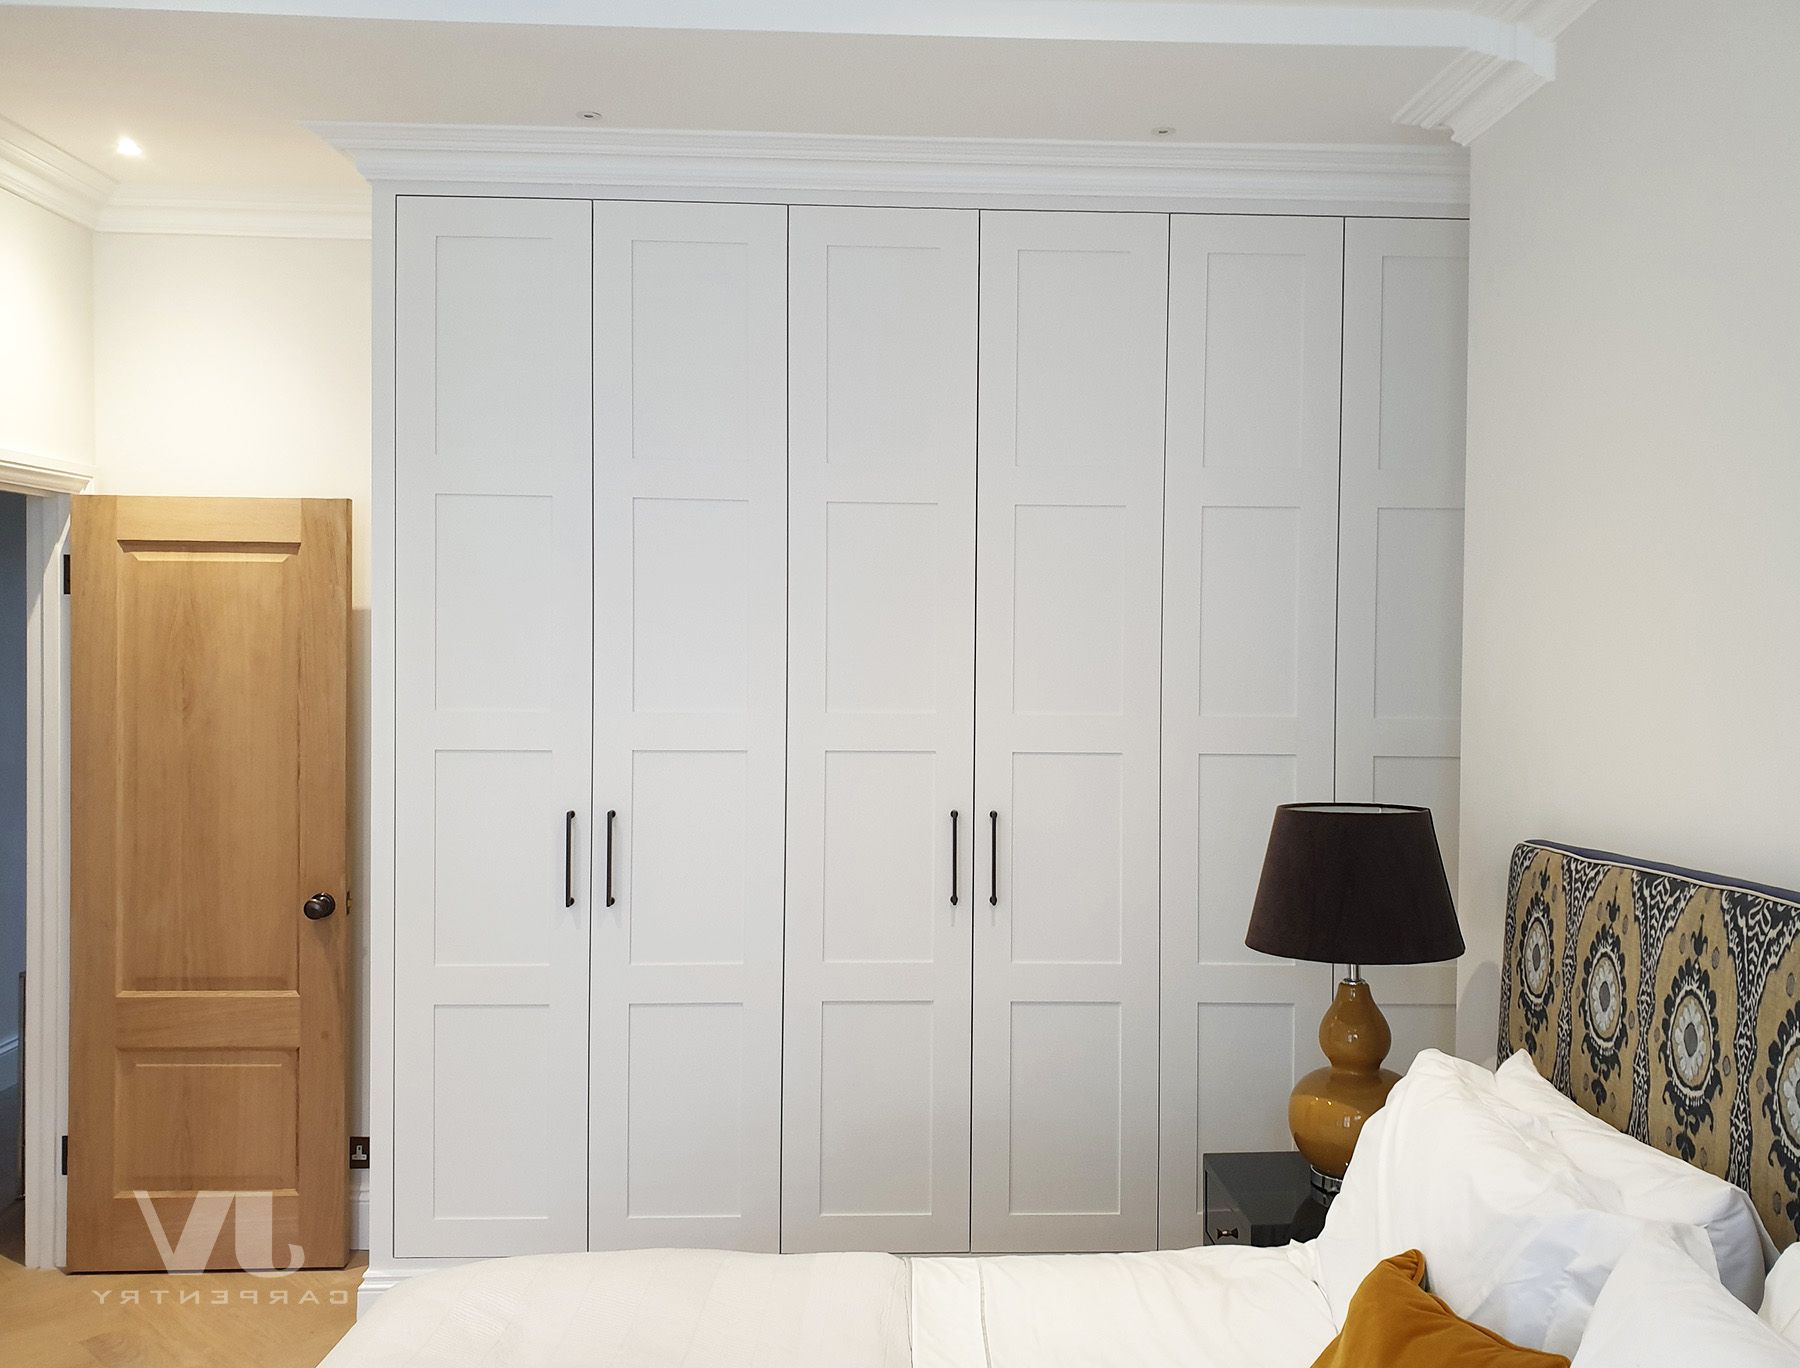 Fitted Wardrobes | Bespoke Bedroom Furniture | Jv Carpentry Intended For Where To  Wardrobes (View 12 of 20)